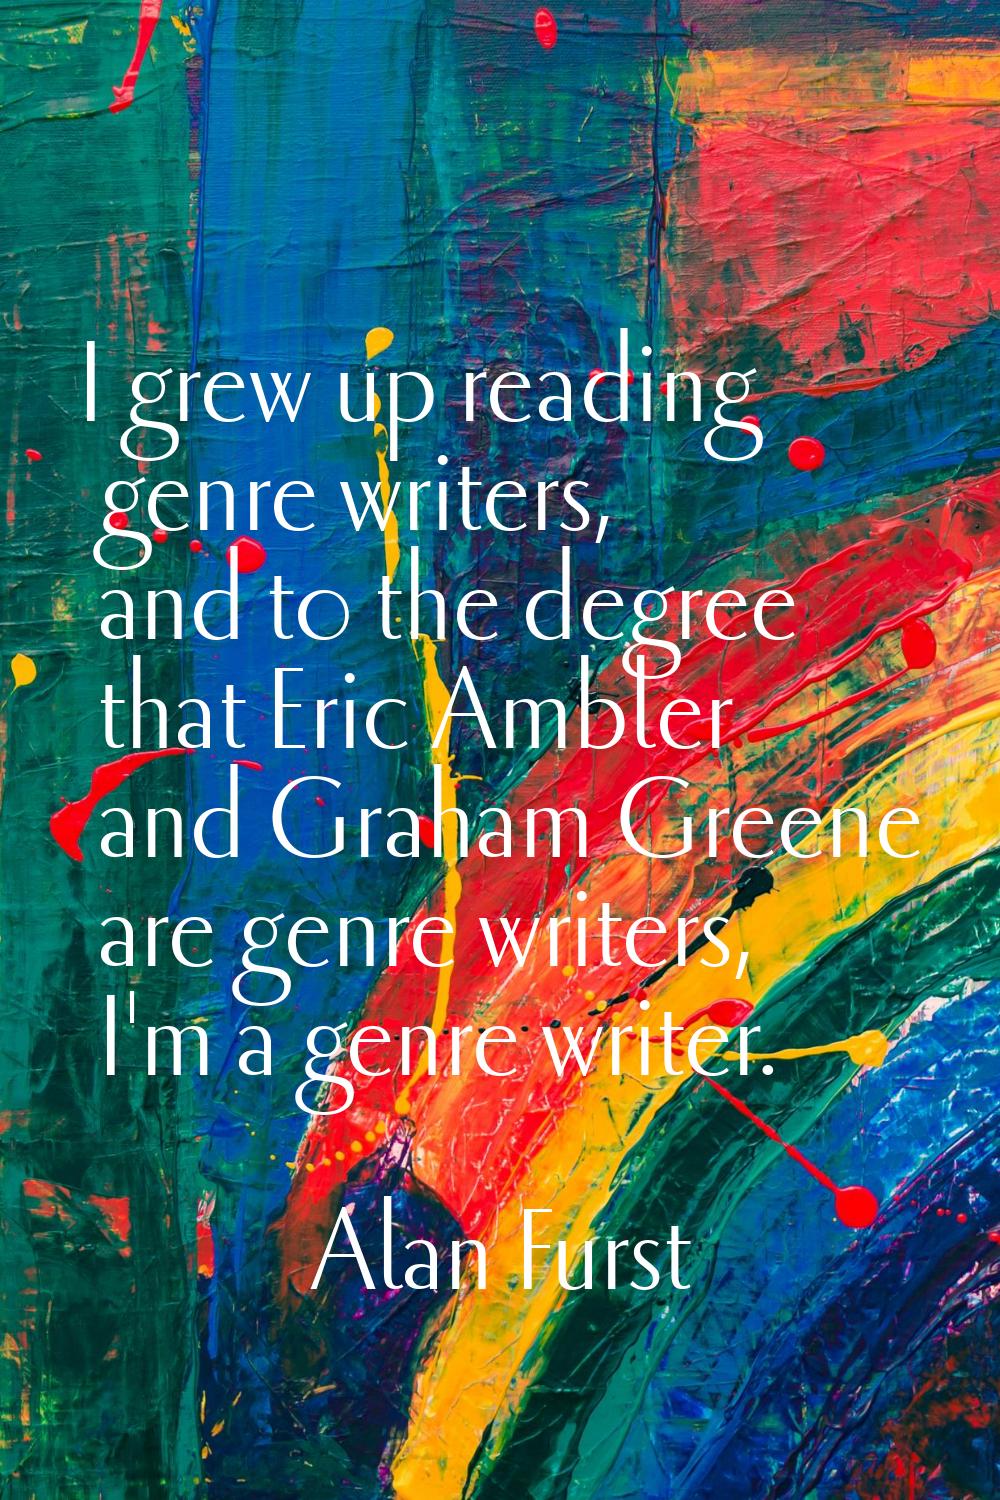 I grew up reading genre writers, and to the degree that Eric Ambler and Graham Greene are genre wri